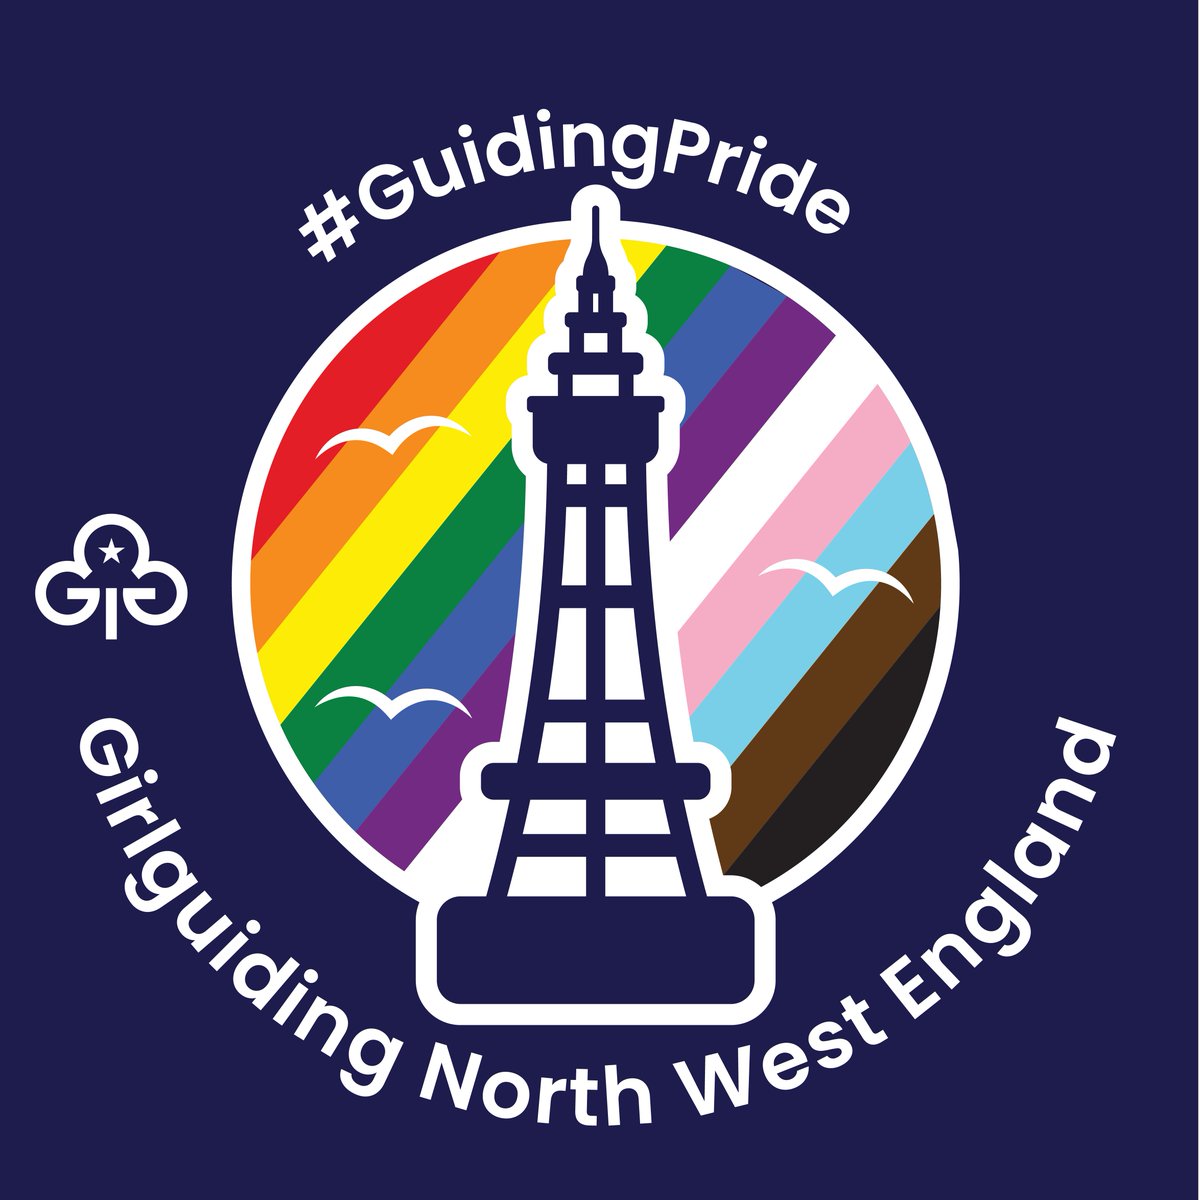 We have some exciting news... we will also be attending Blackpool Pride this year, on Saturday 8 June 2024! 🏳️‍🌈❤️ We have 100 spaces for volunteers aged 14+ to join us on the day. Everything you need to know is on our region website, click here- ow.ly/9T8U50RqSno